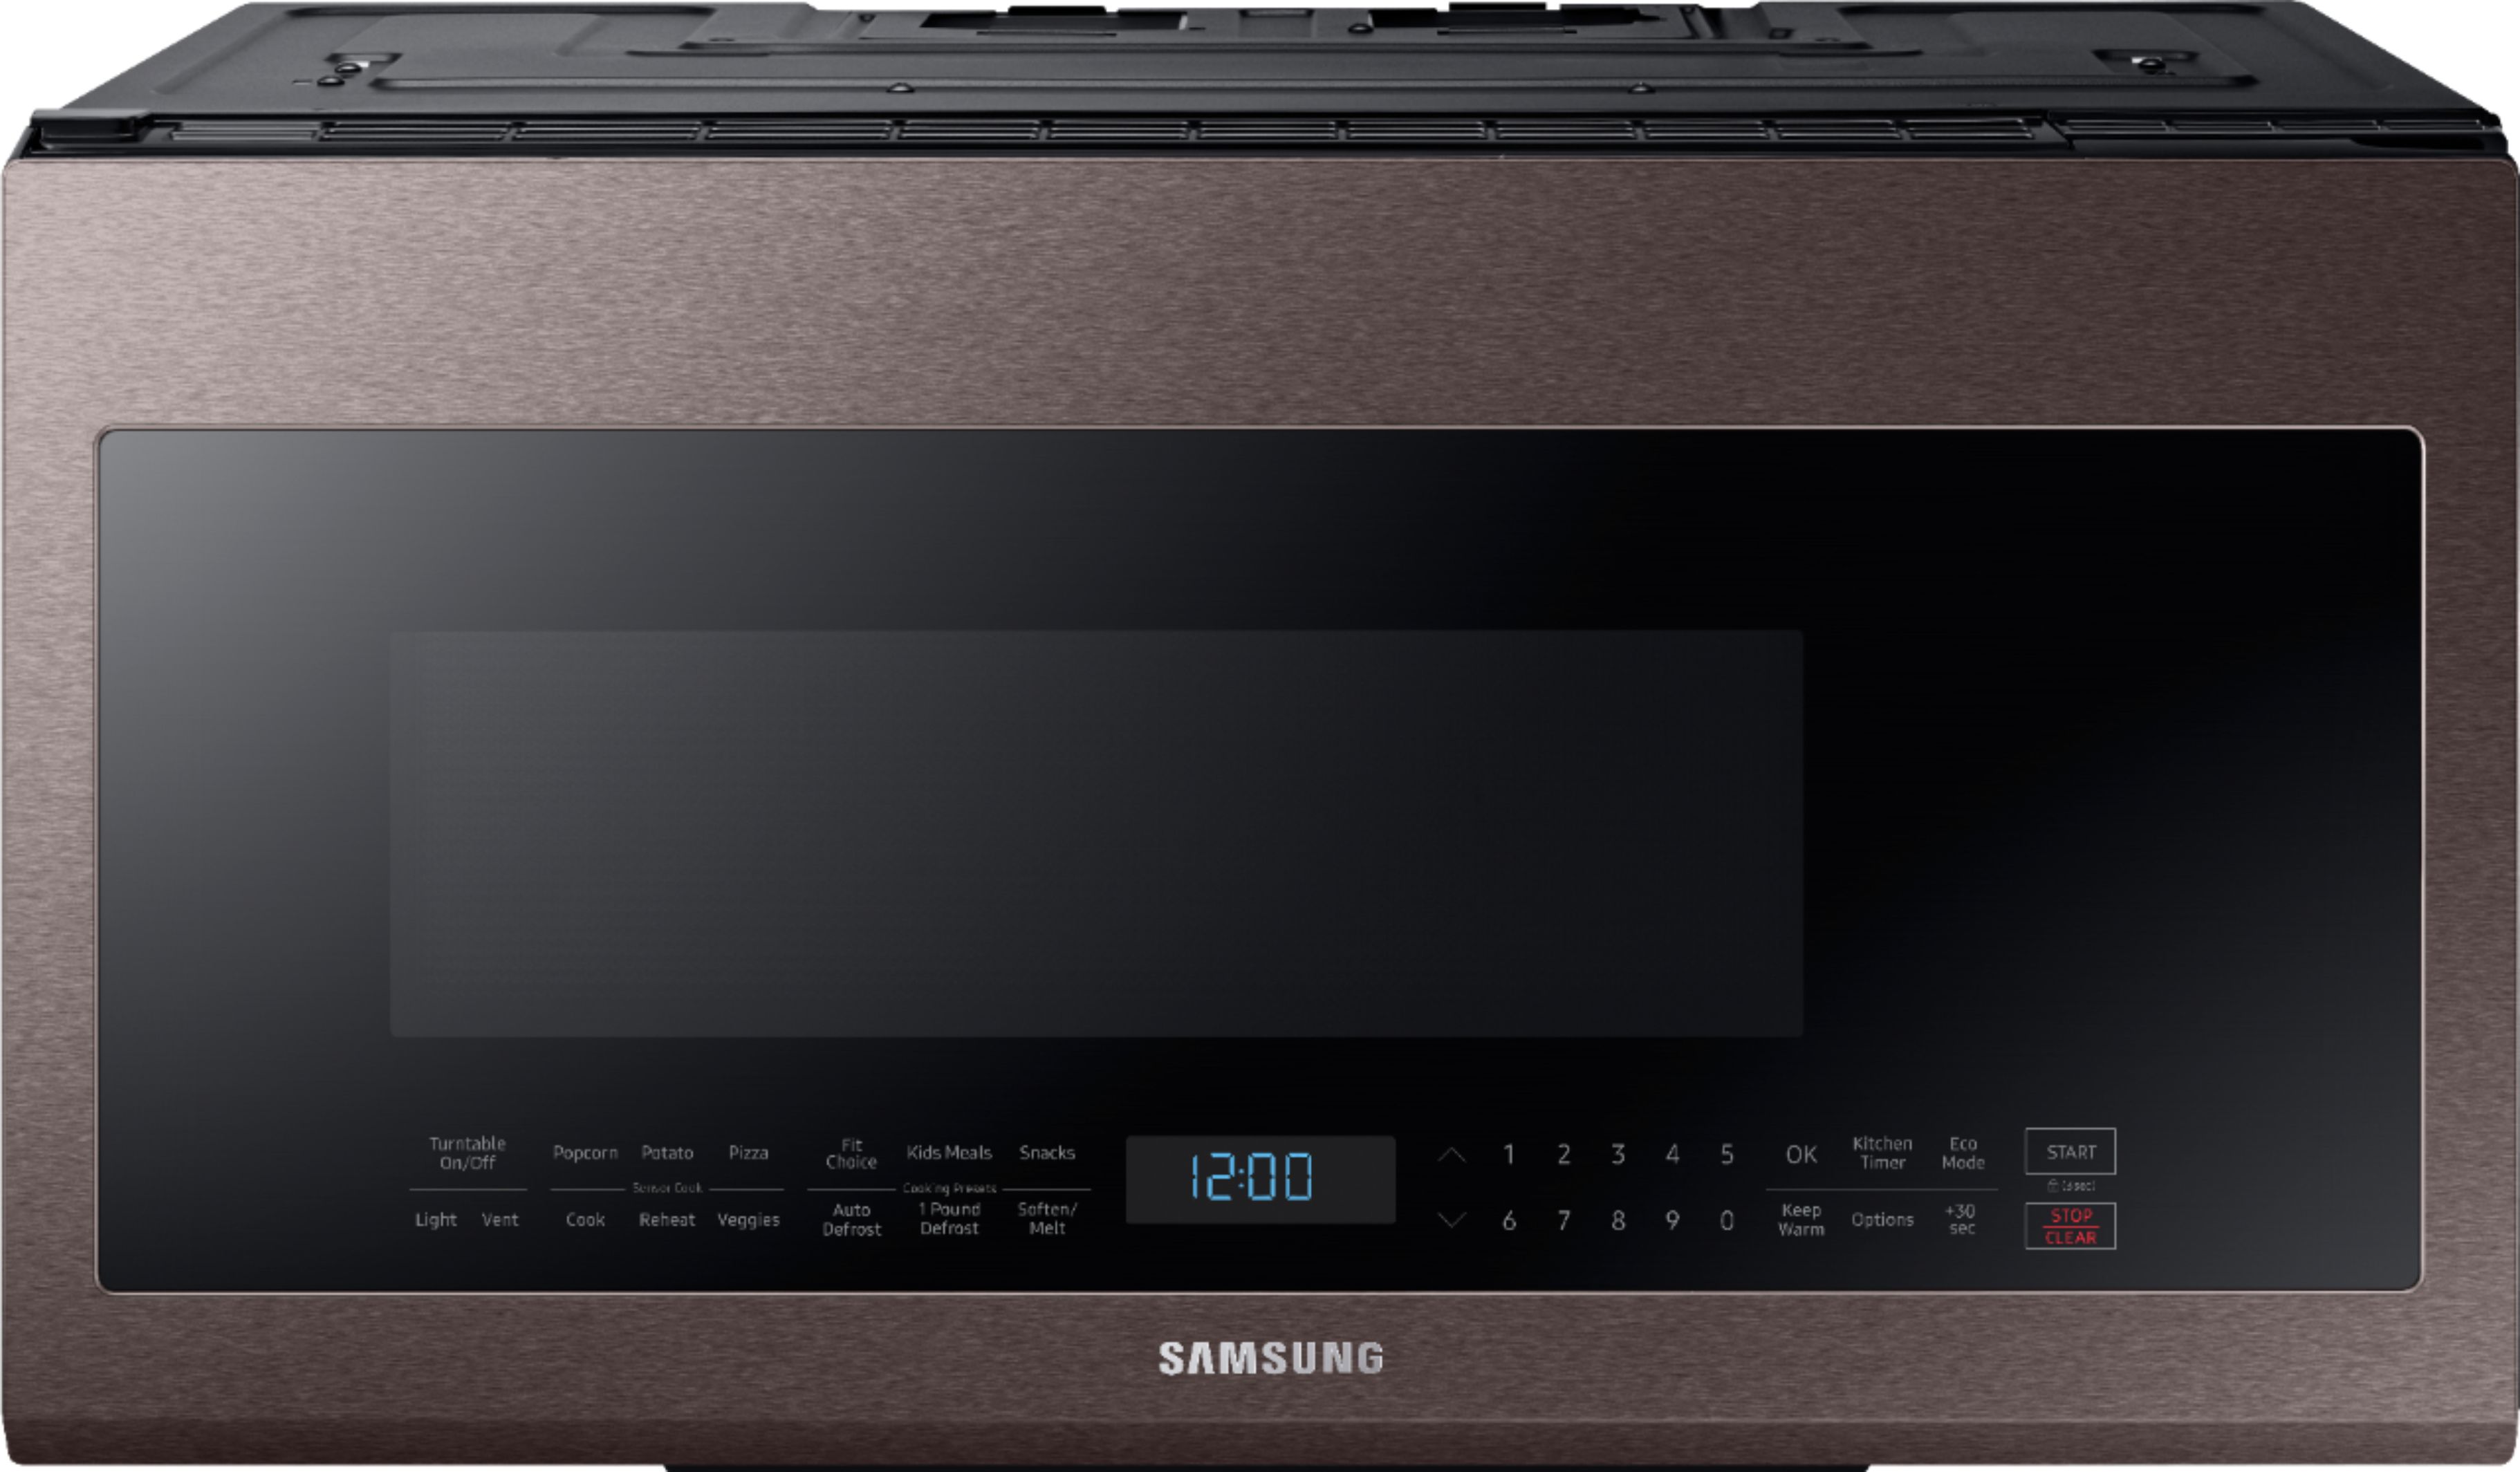 Samsung - 2.1 Cu. Ft. Over-the-Range Microwave with Sensor Cook - Tuscan stainless steel